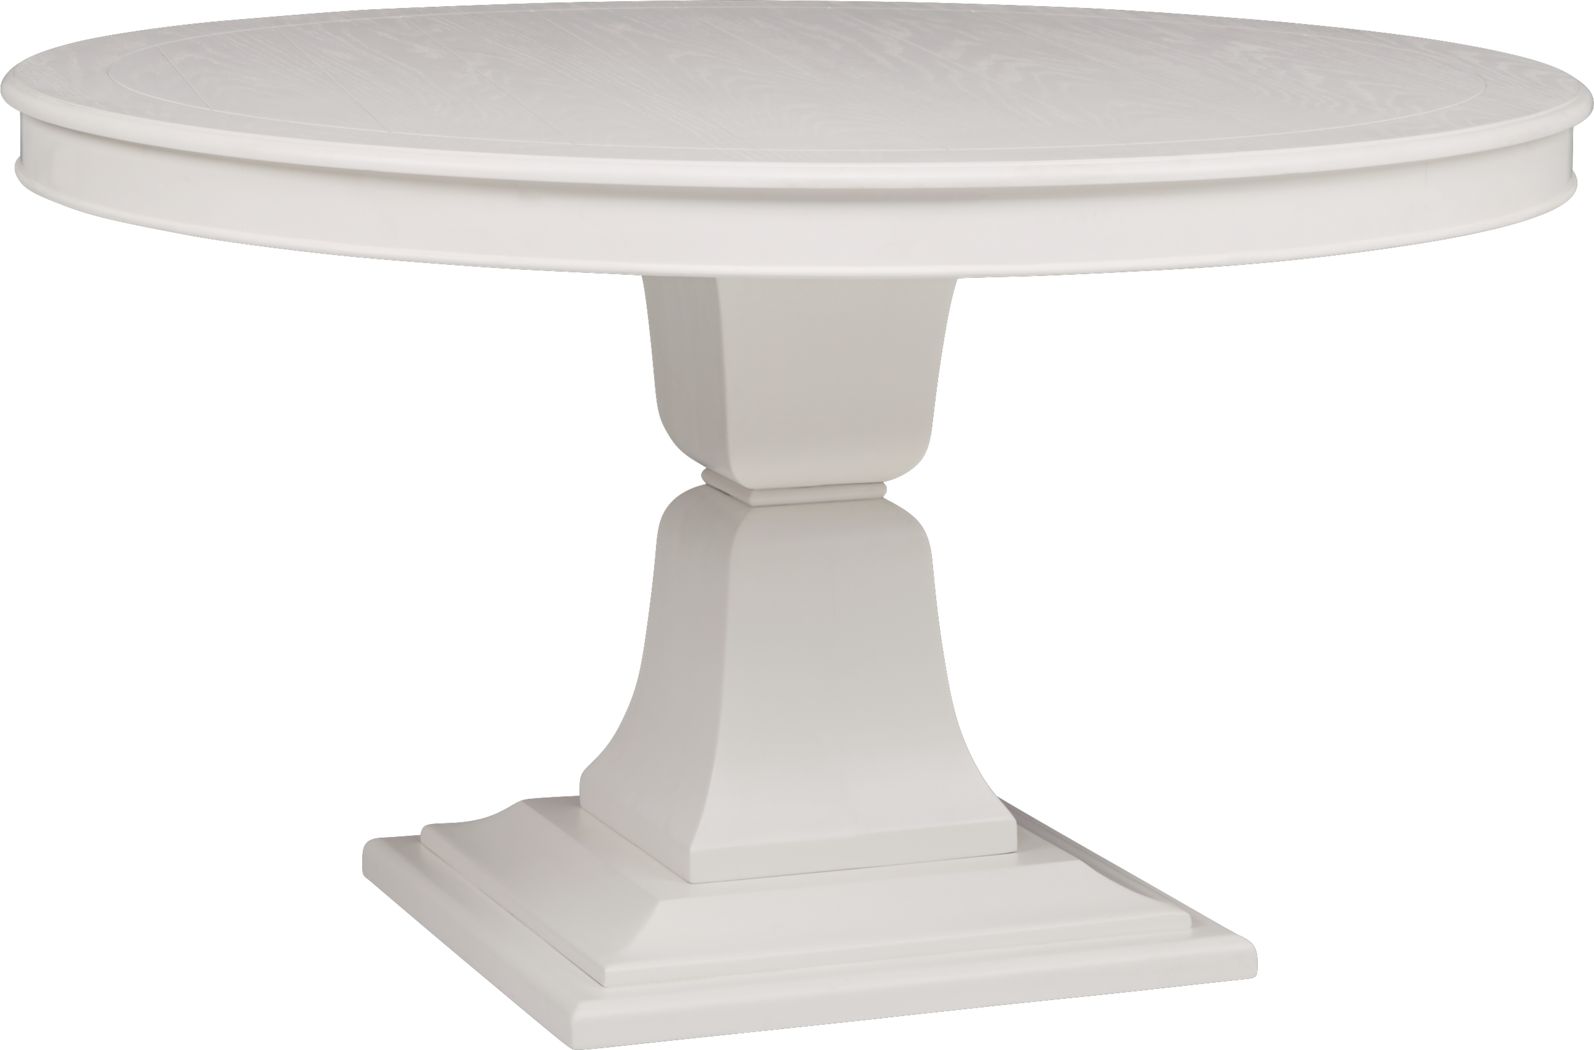 Cindy Crawford Home Cape Cottage White Round Dining Table Rooms To Go